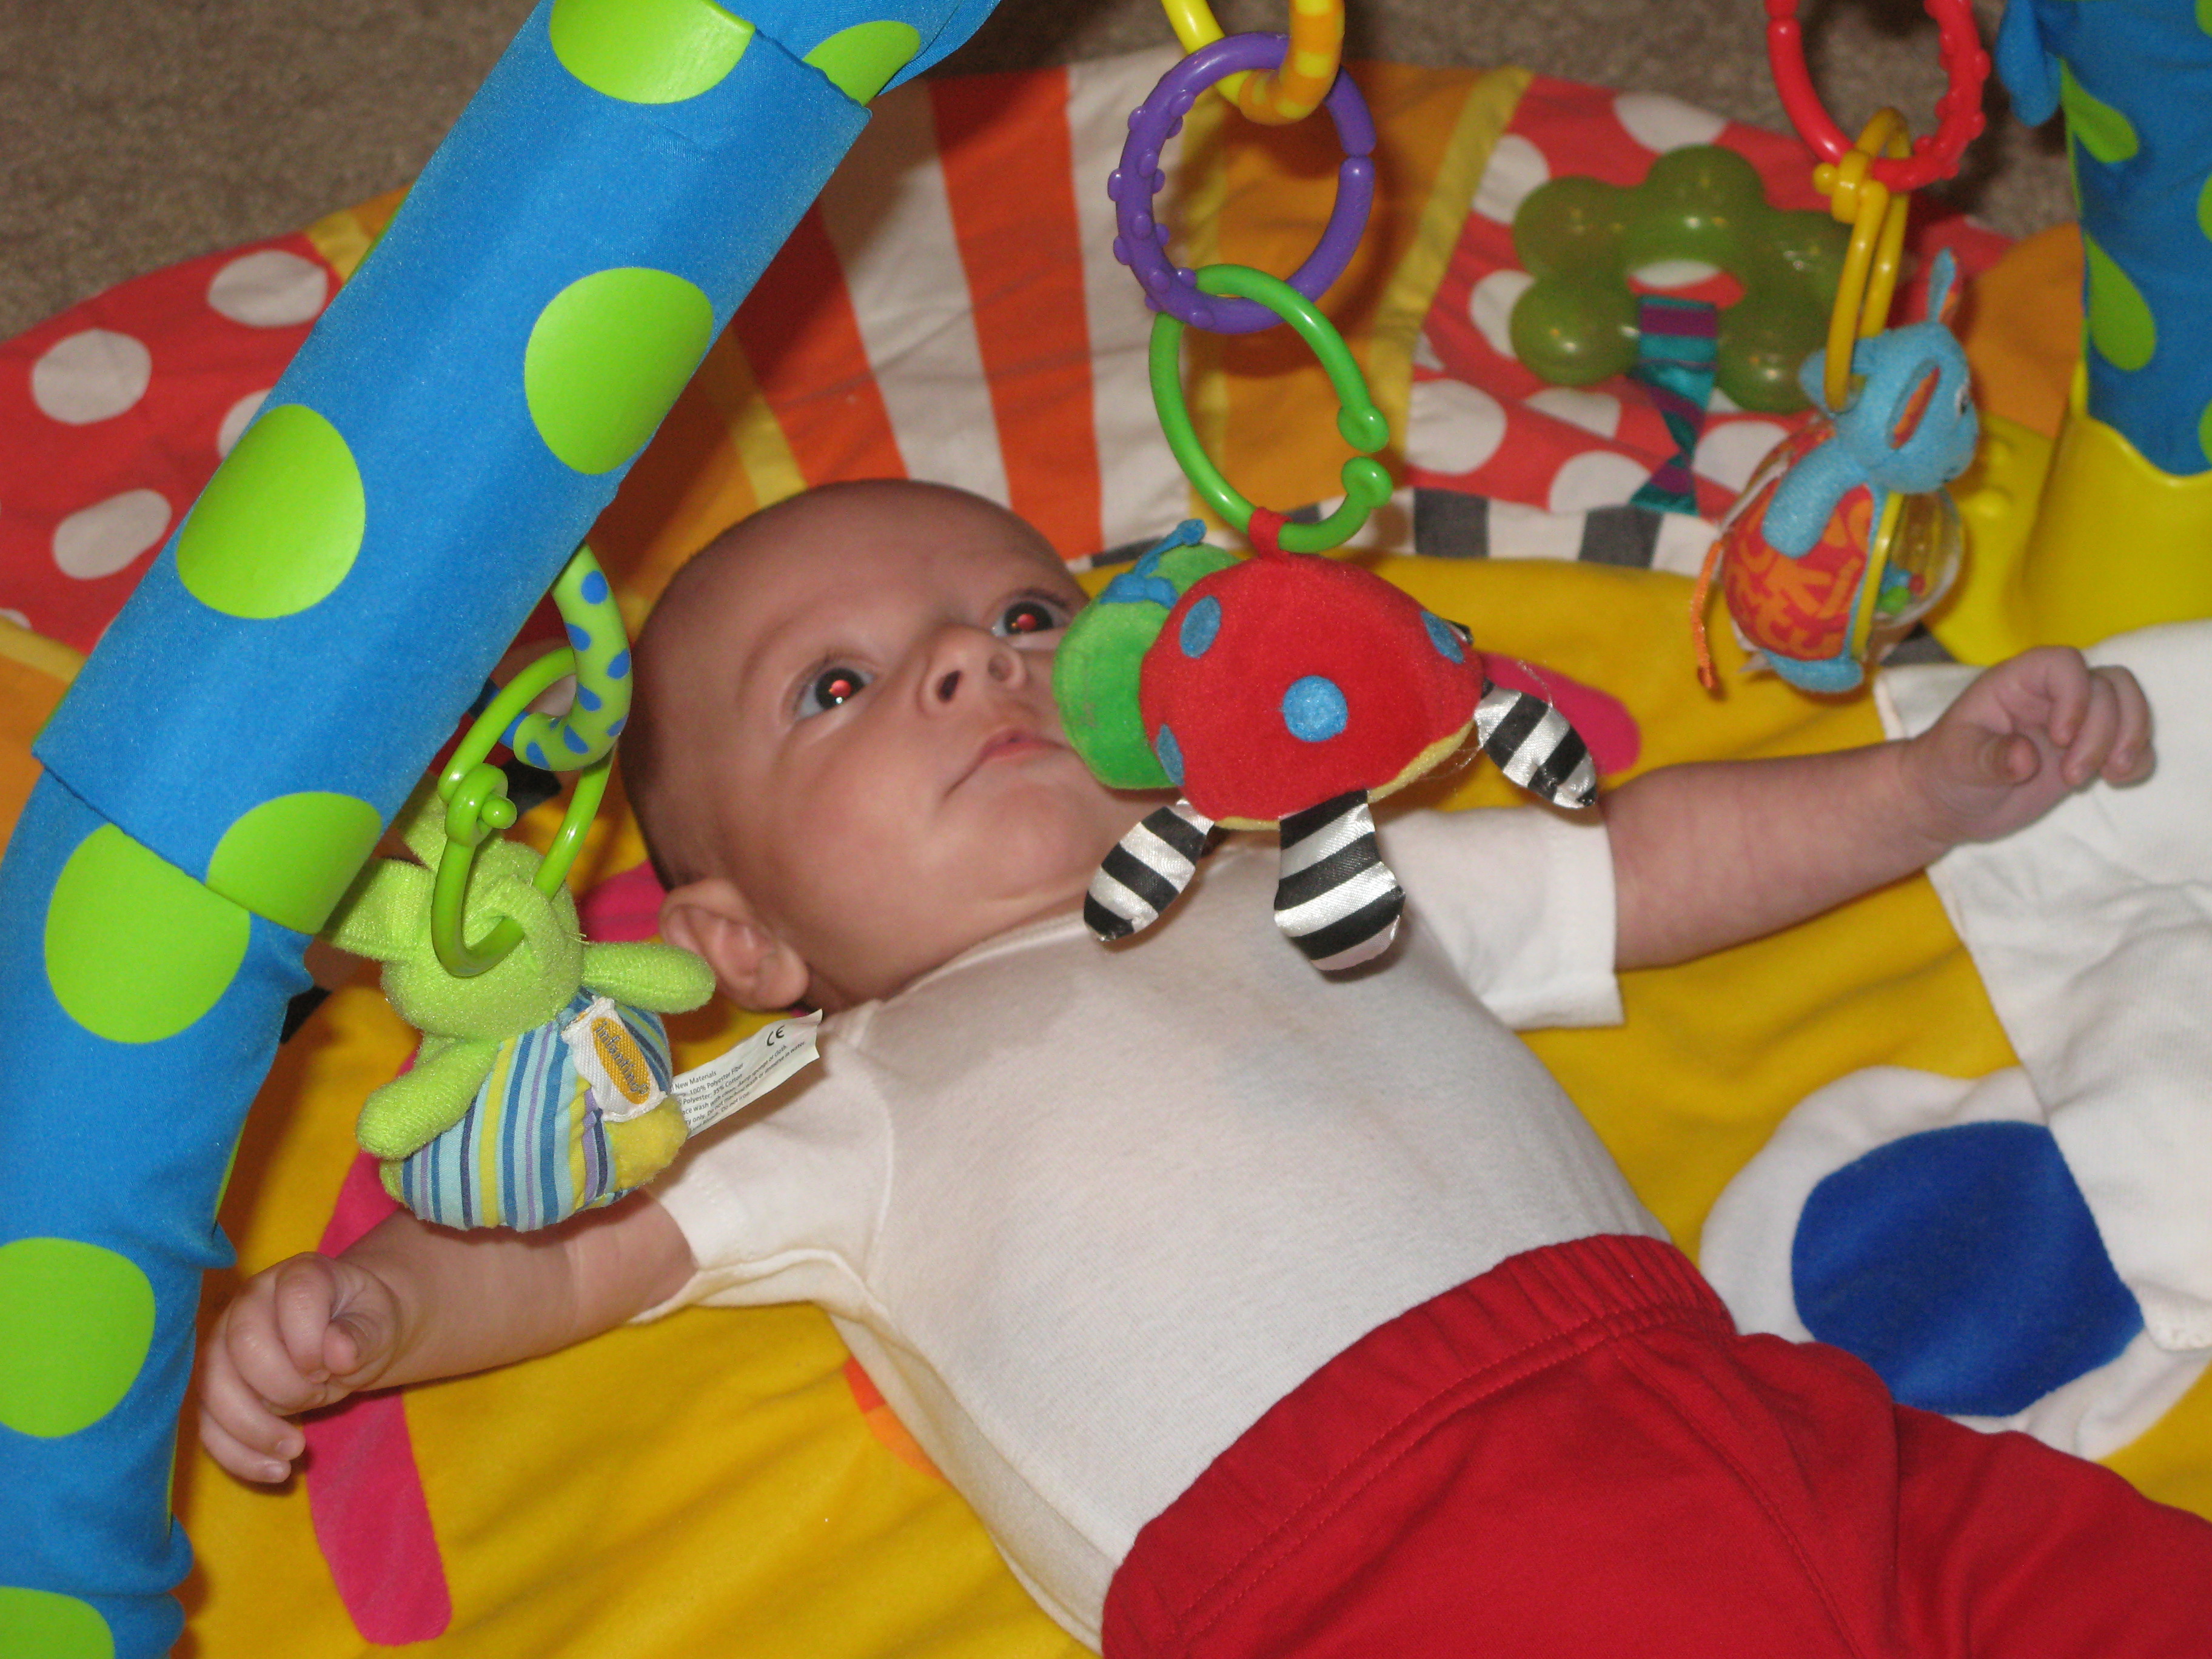 Owen played in a play gym while we opened presents